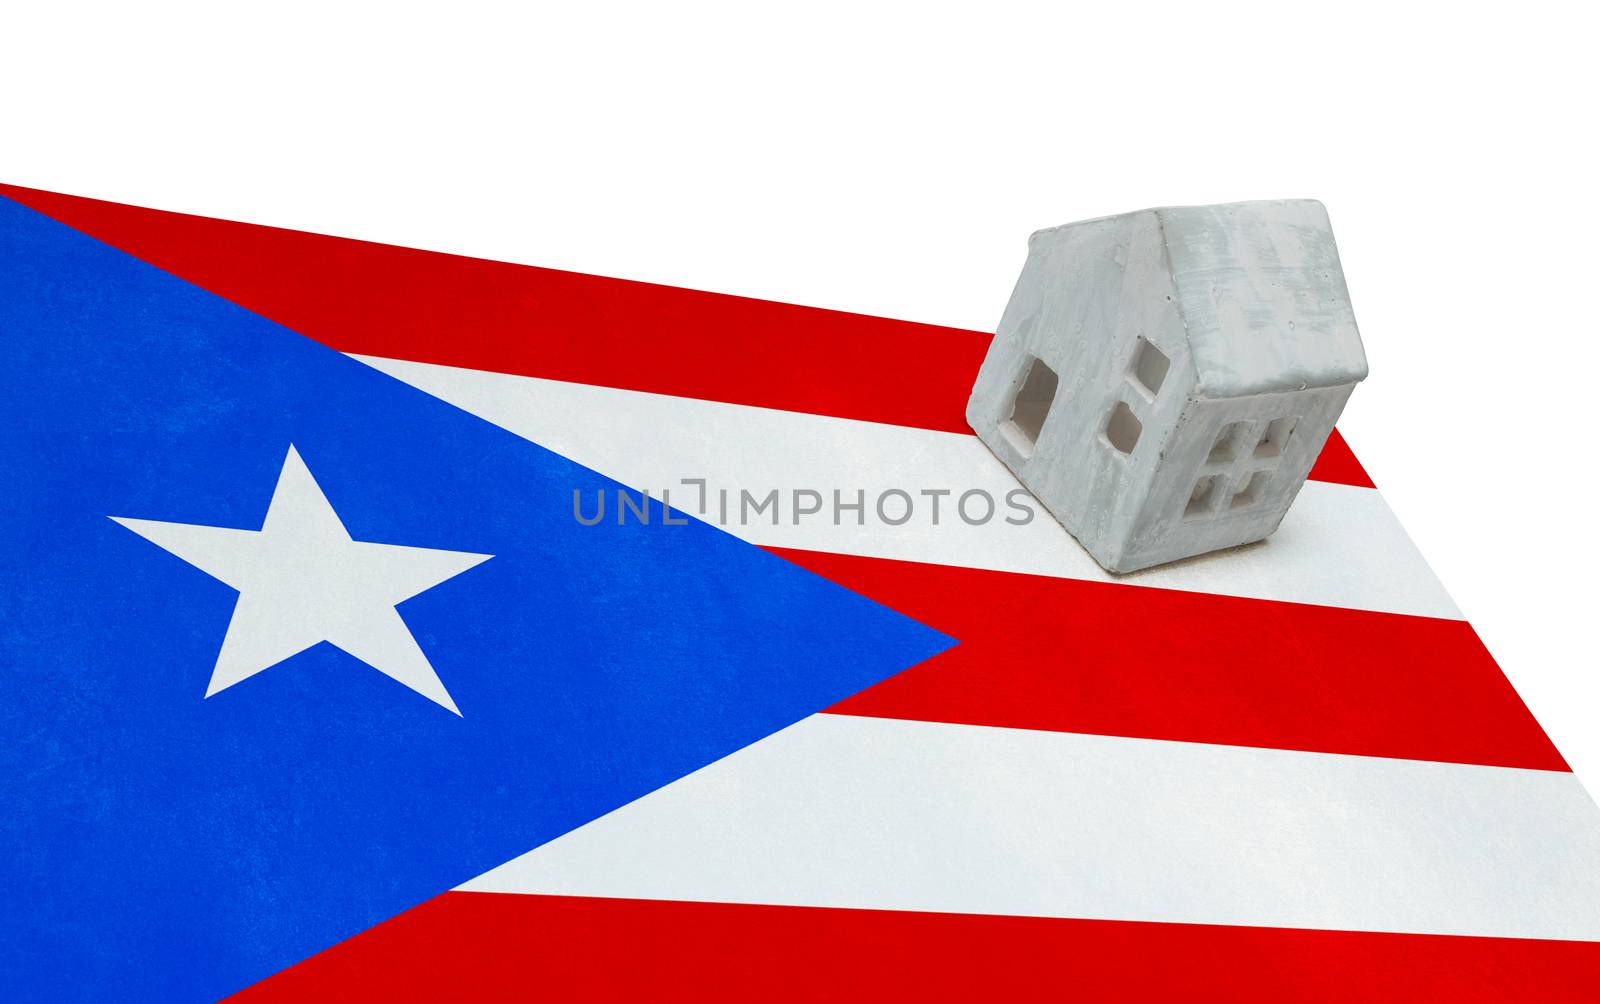 Small house on a flag - Puerto Rico by michaklootwijk